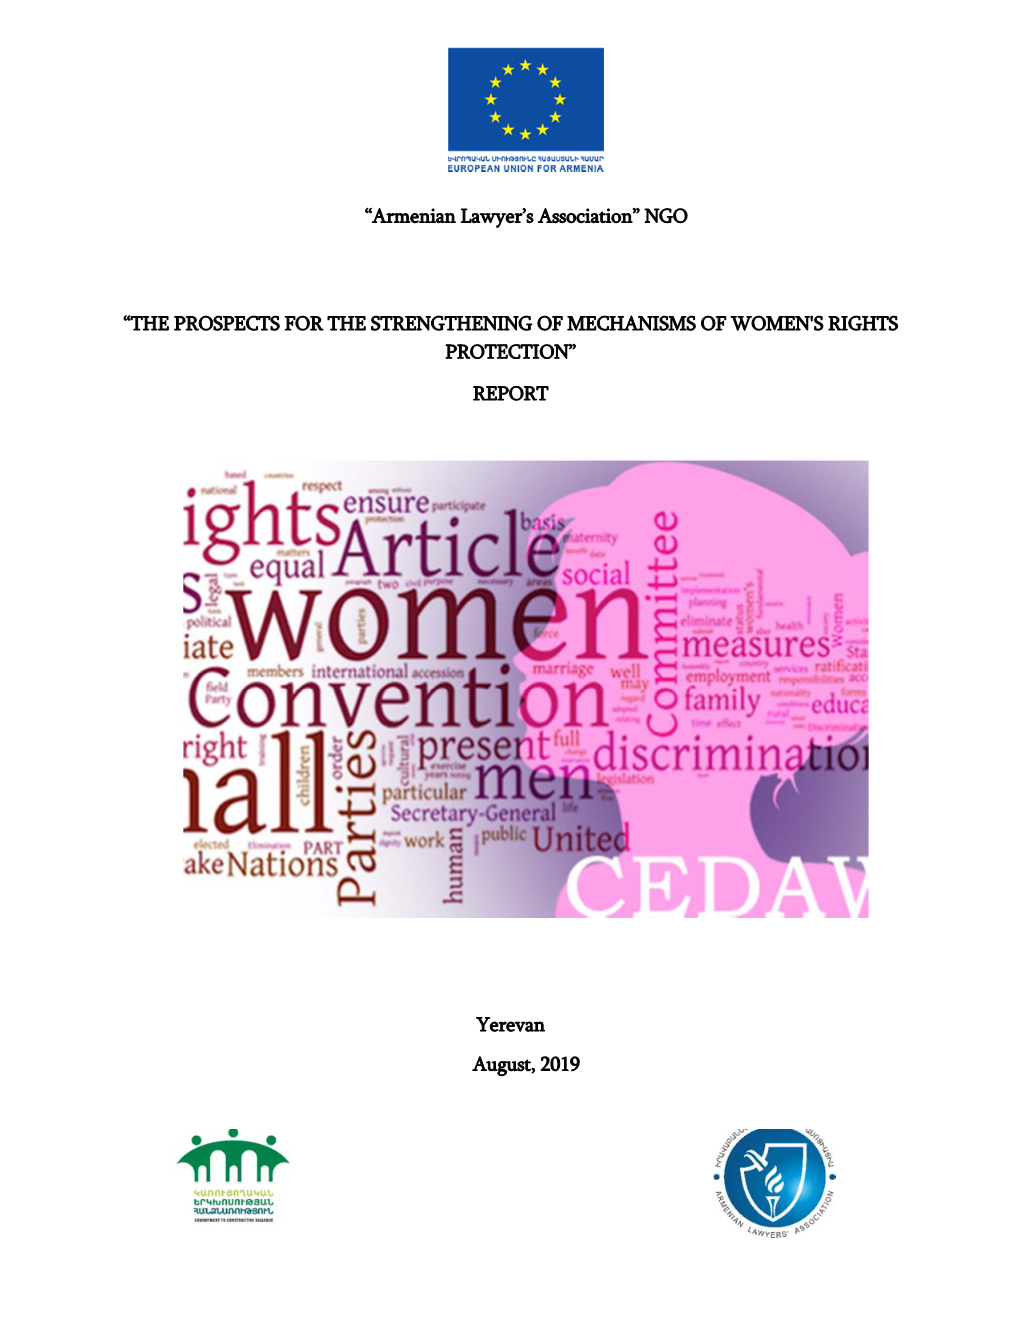 The Prospects for the Strengthening of Mechanisms of Women's Rights Protection”